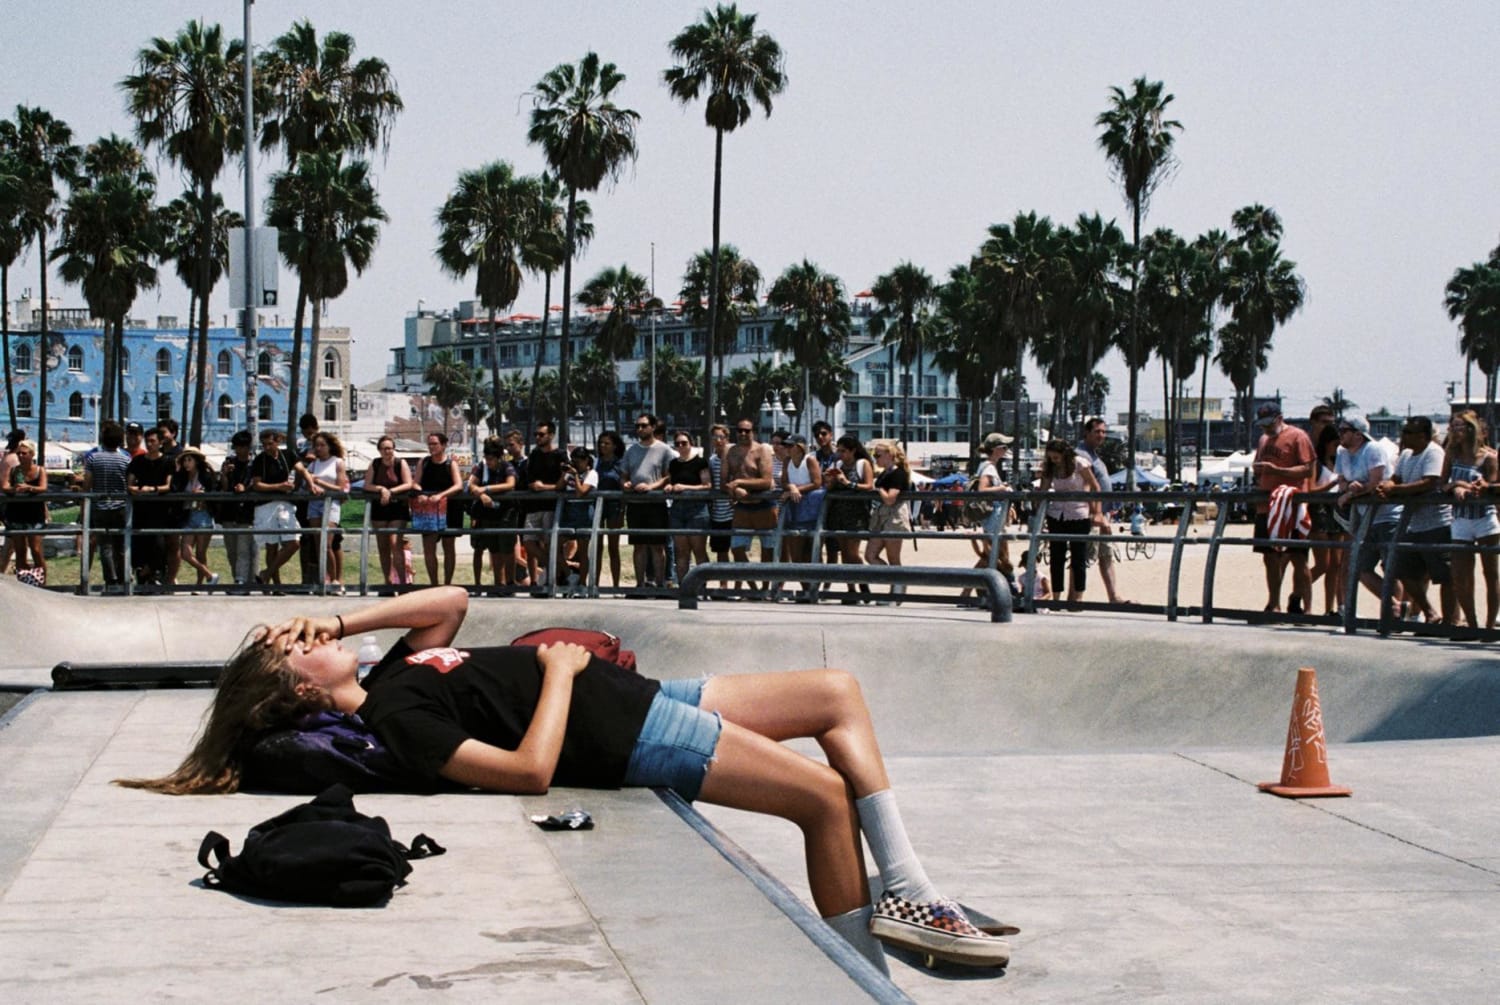 Venice Beach! Taken with Canon Elan IIe camera with Lomography color negative 400 speed 35mm film.